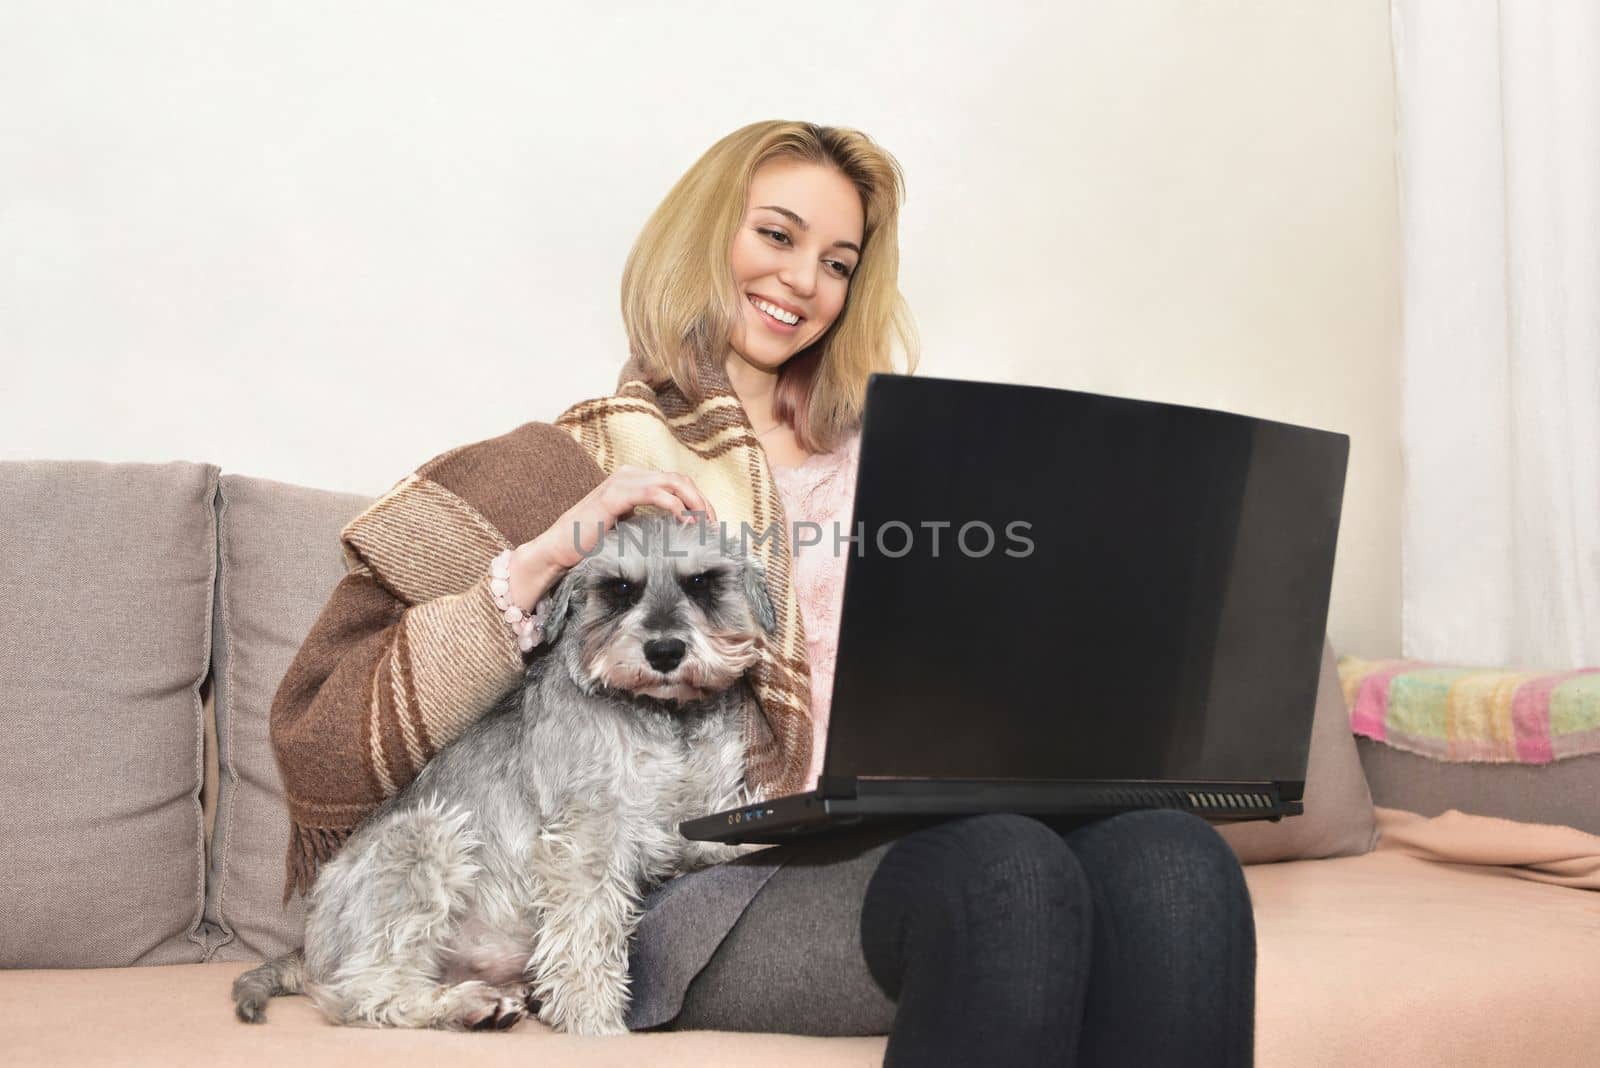 Gray shaggy schnauzer dog is sitting on the couch in the arms of a girl who is working on a laptop.